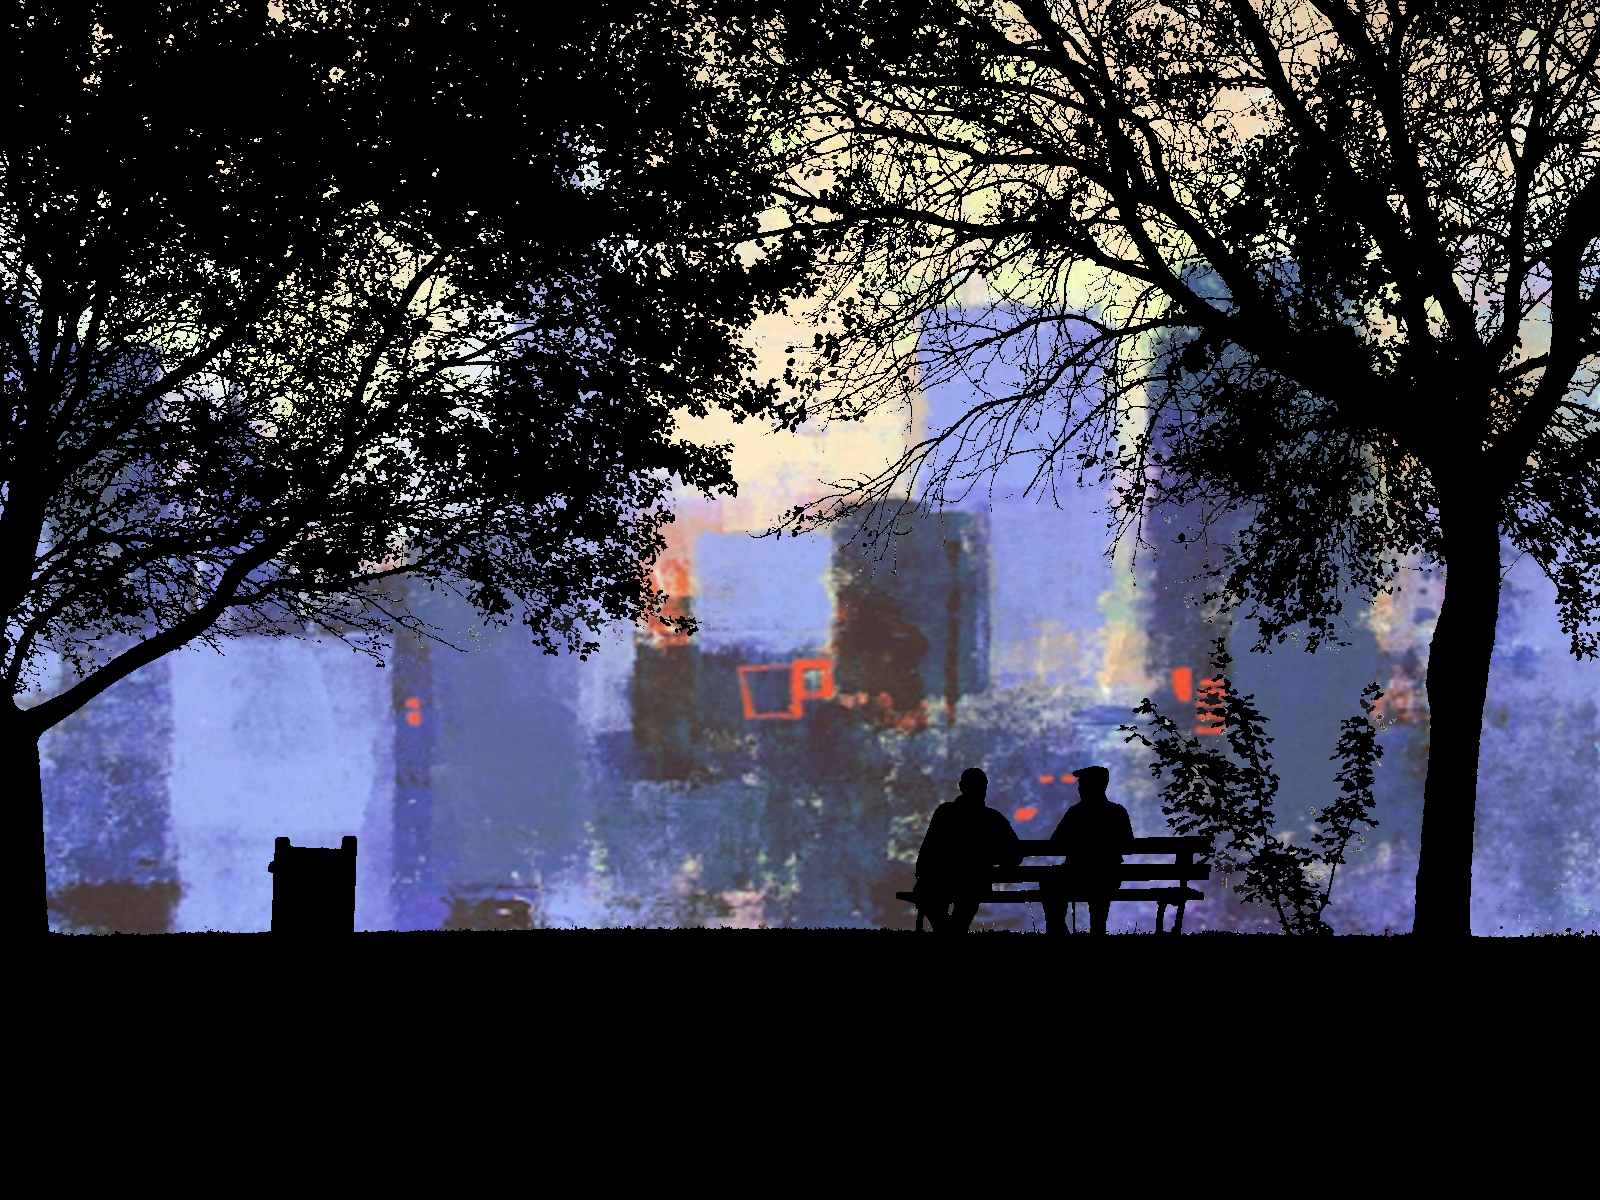 two people sitting on a bench by a tree at night